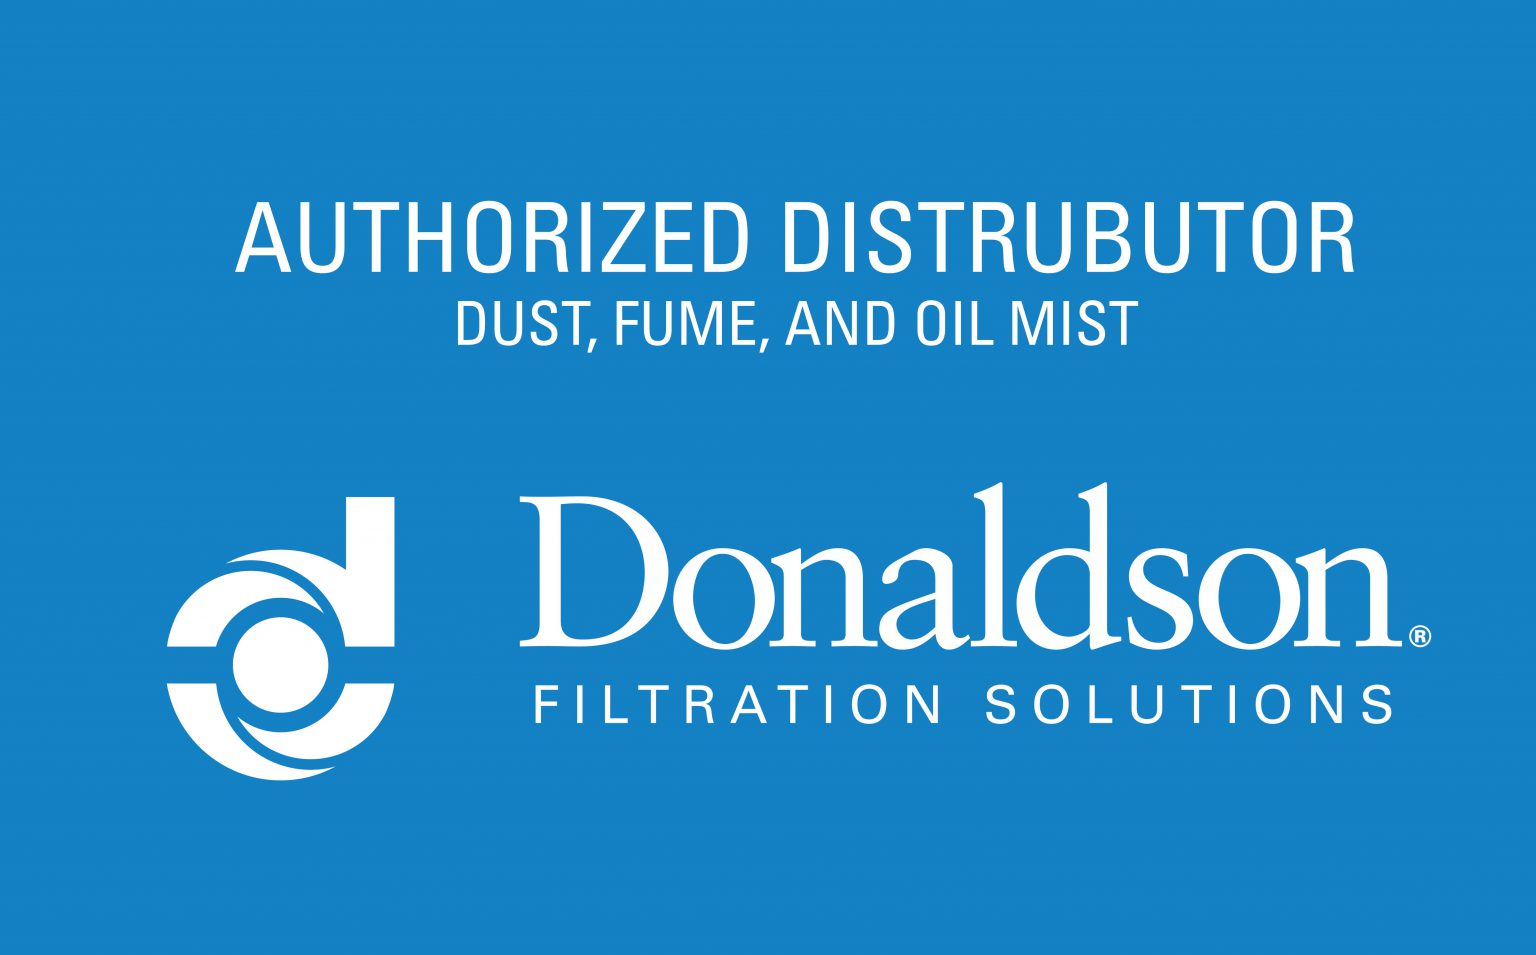 donaldson ,filters, dce, torrit, dfpro, dust air filtration, filtration, tamworth, west midlands, west midlands filtration, LEV, LEV reporting, LEV testing. cleaning air, clean air, safe working environments, nederman, dust collectors, nordfab, wet collectors, fume extraction